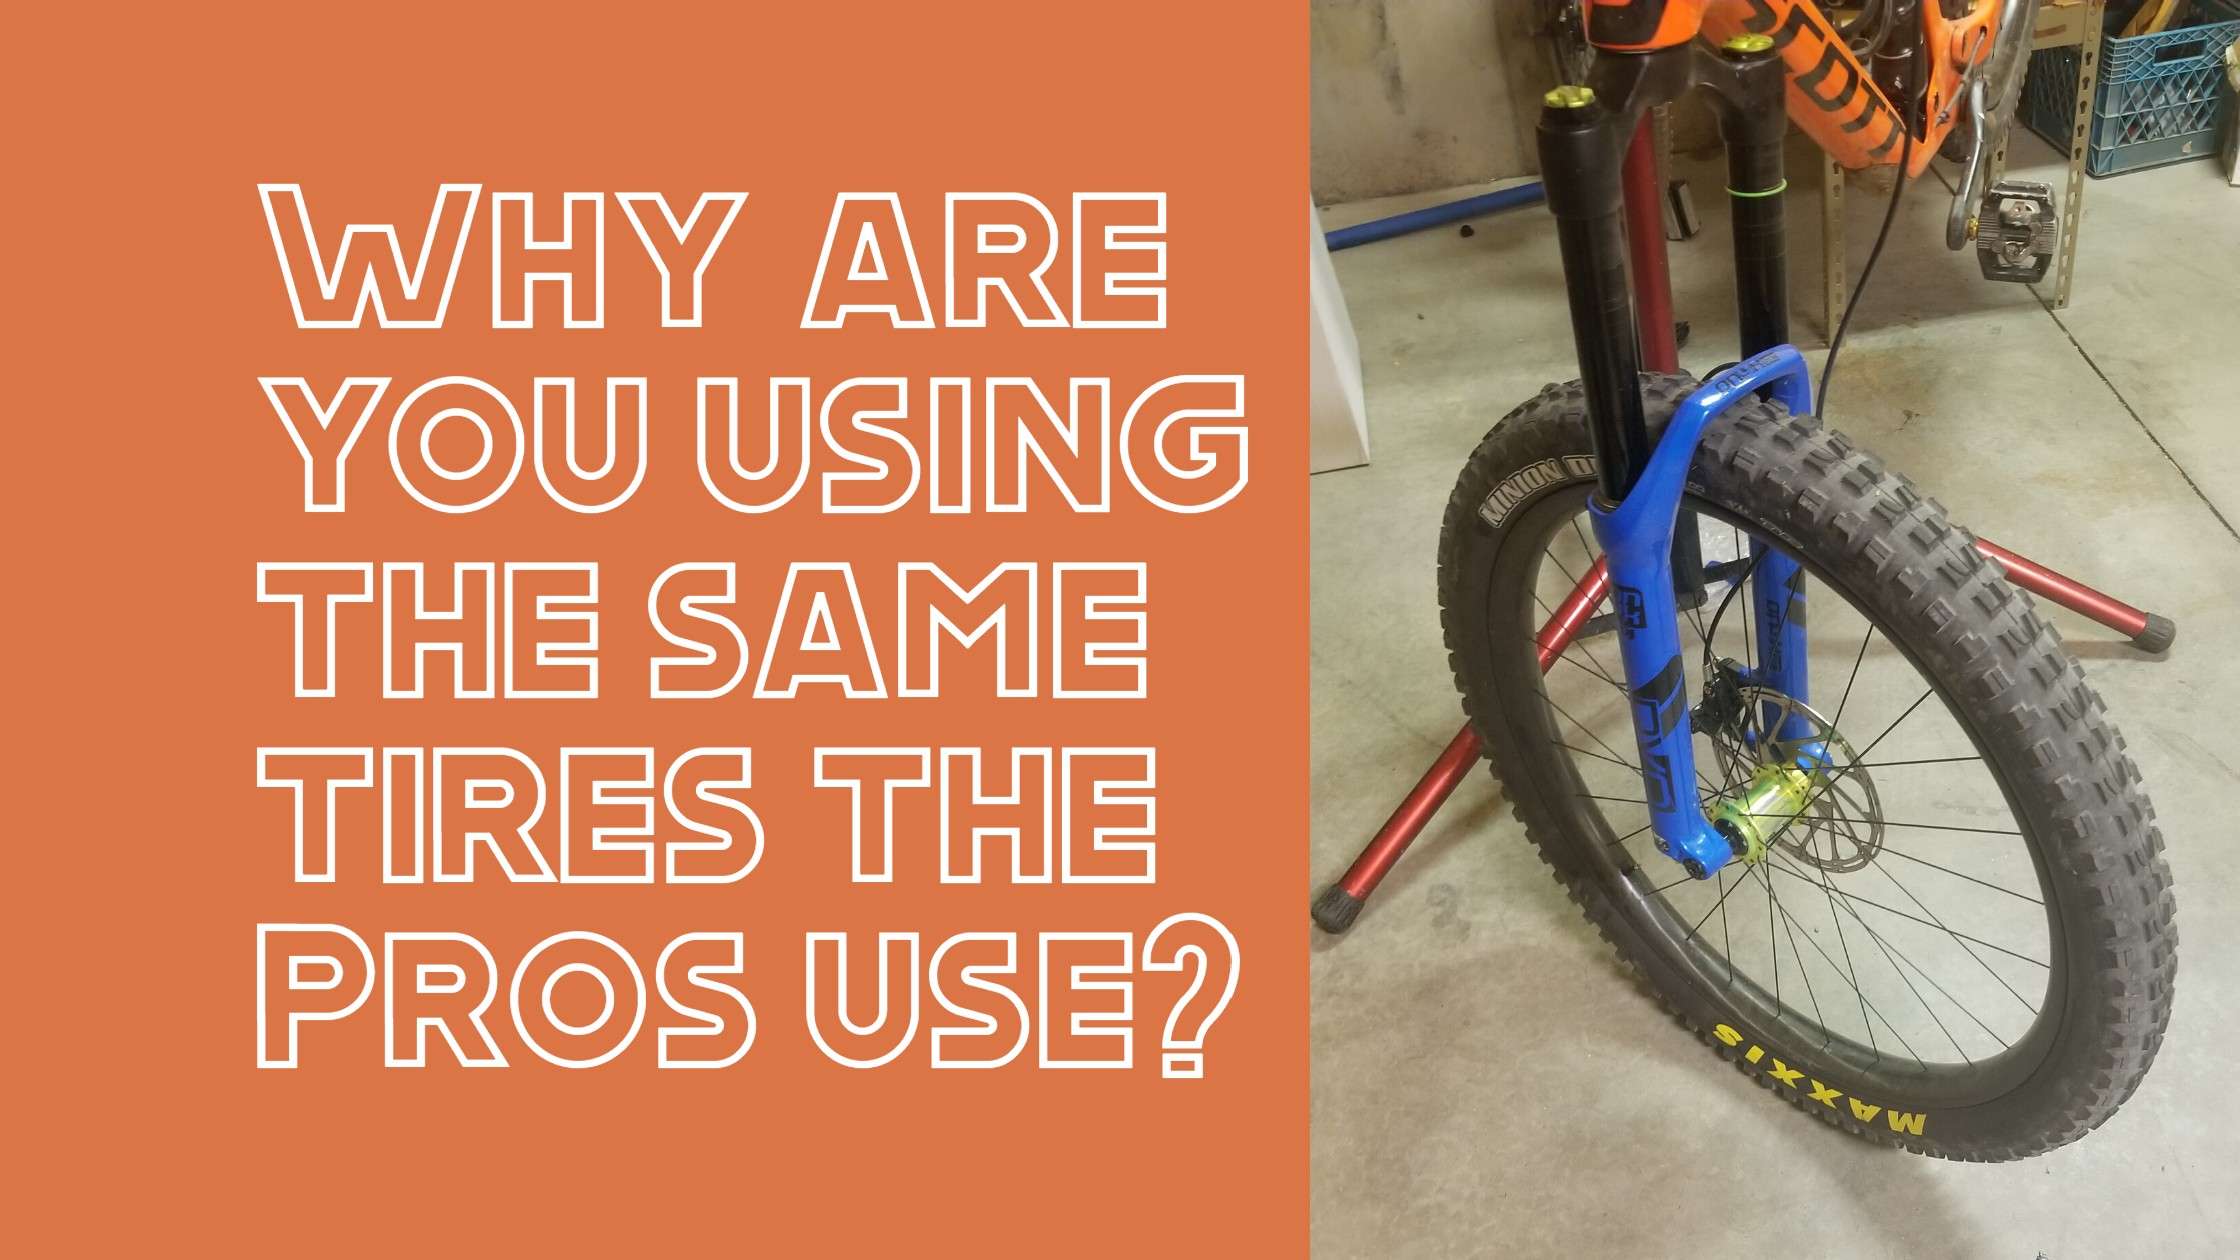 Why Are You Using The Same MTB Tires the Pros Use?